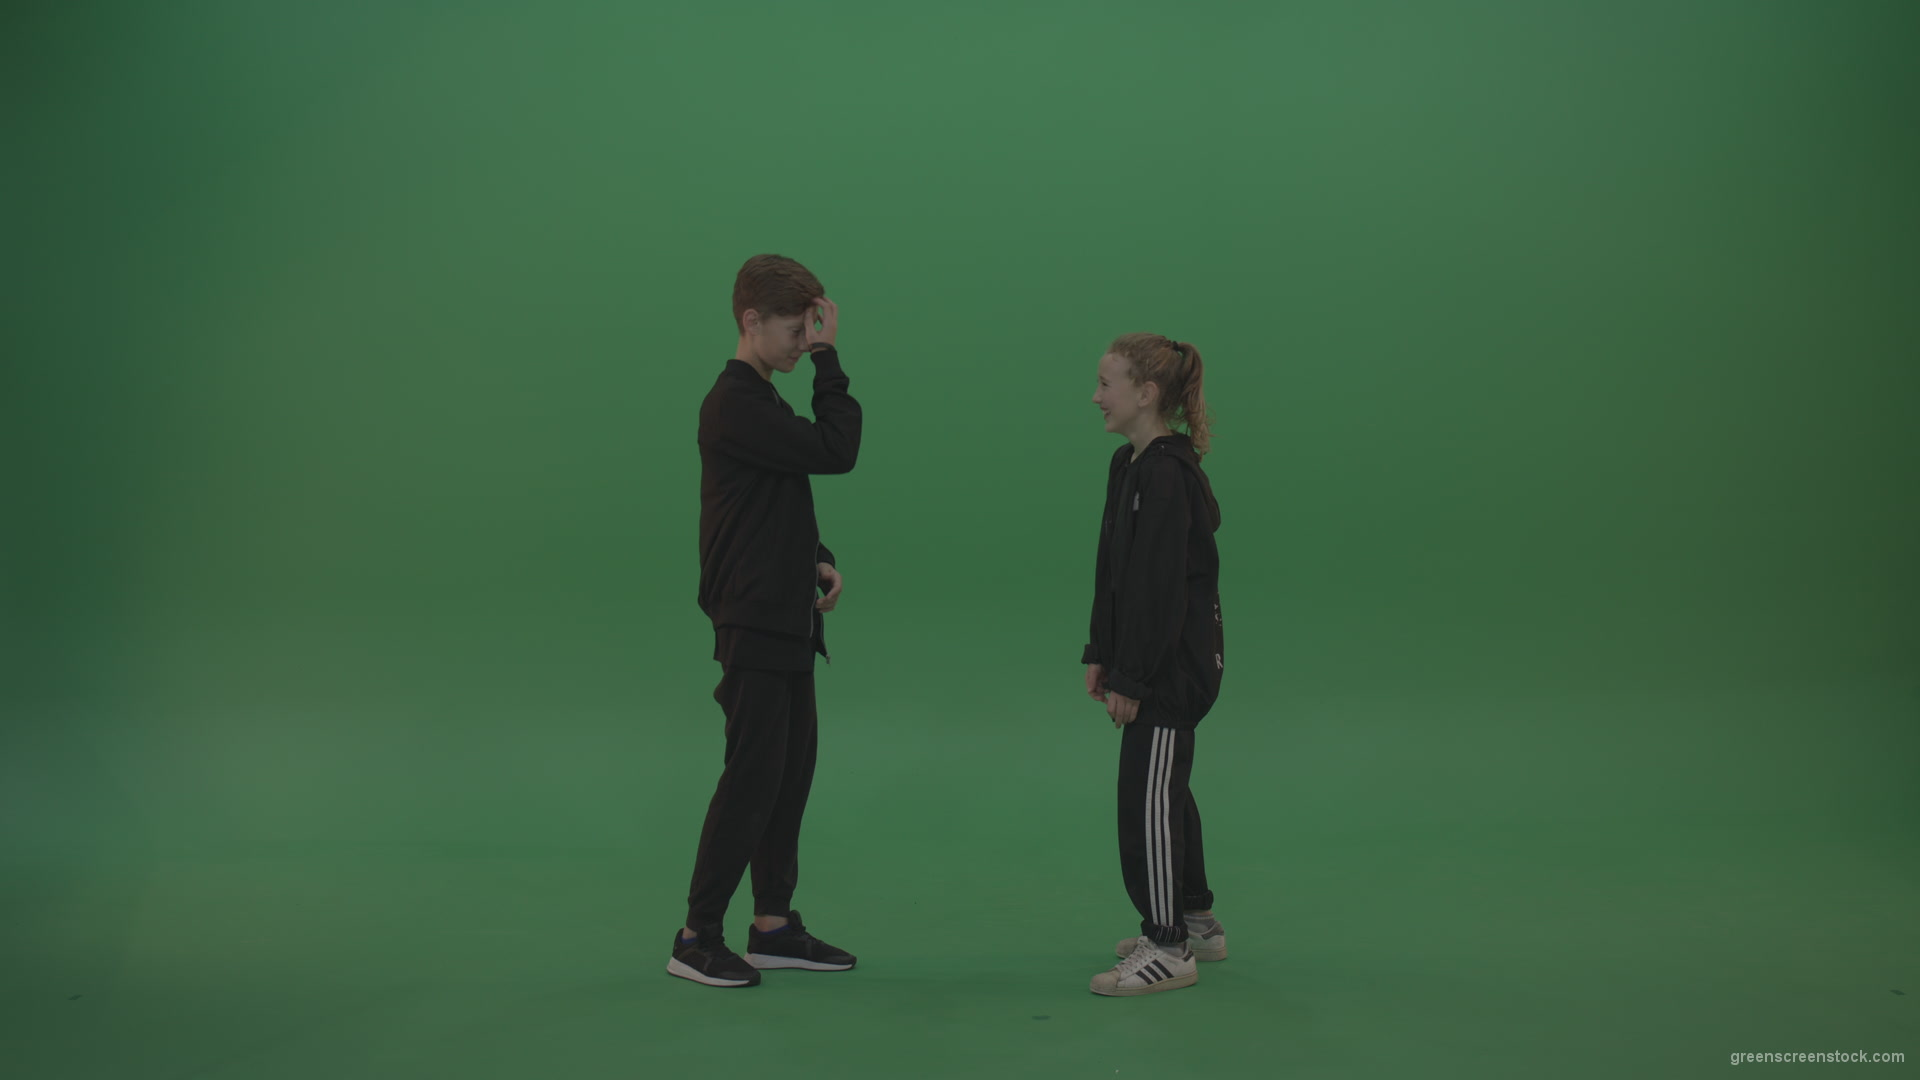 Boy-in-black-wear-talks-to-girl-over-chromakey-background_001 Green Screen Stock